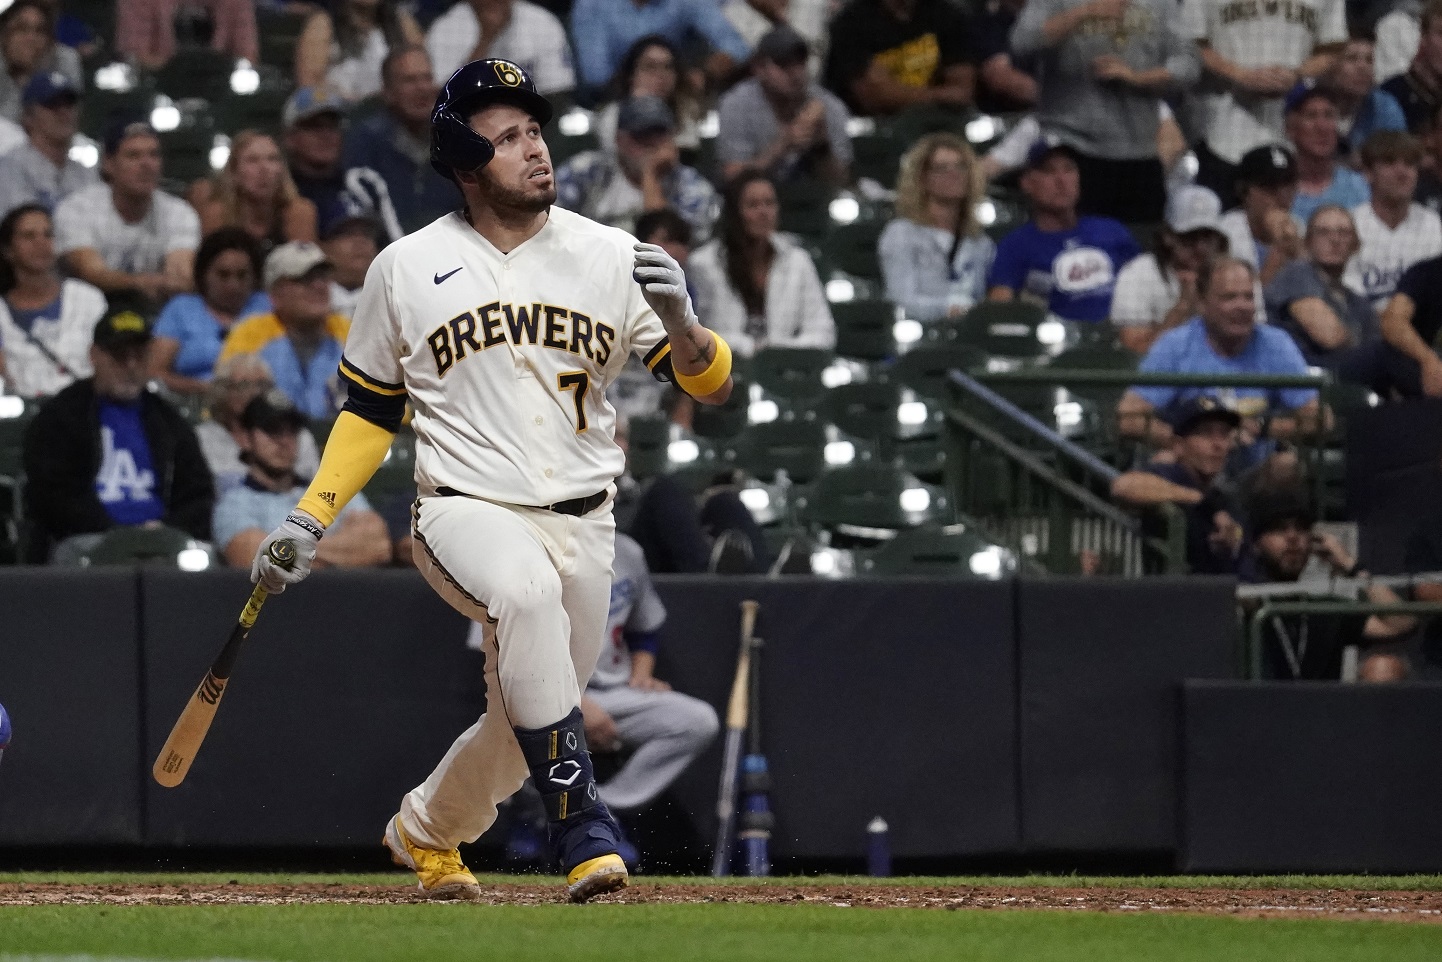 WATCH: Down 4-3 in bottom of 11th, Brewers Caratini the hero in win over MLB-best Dodgers